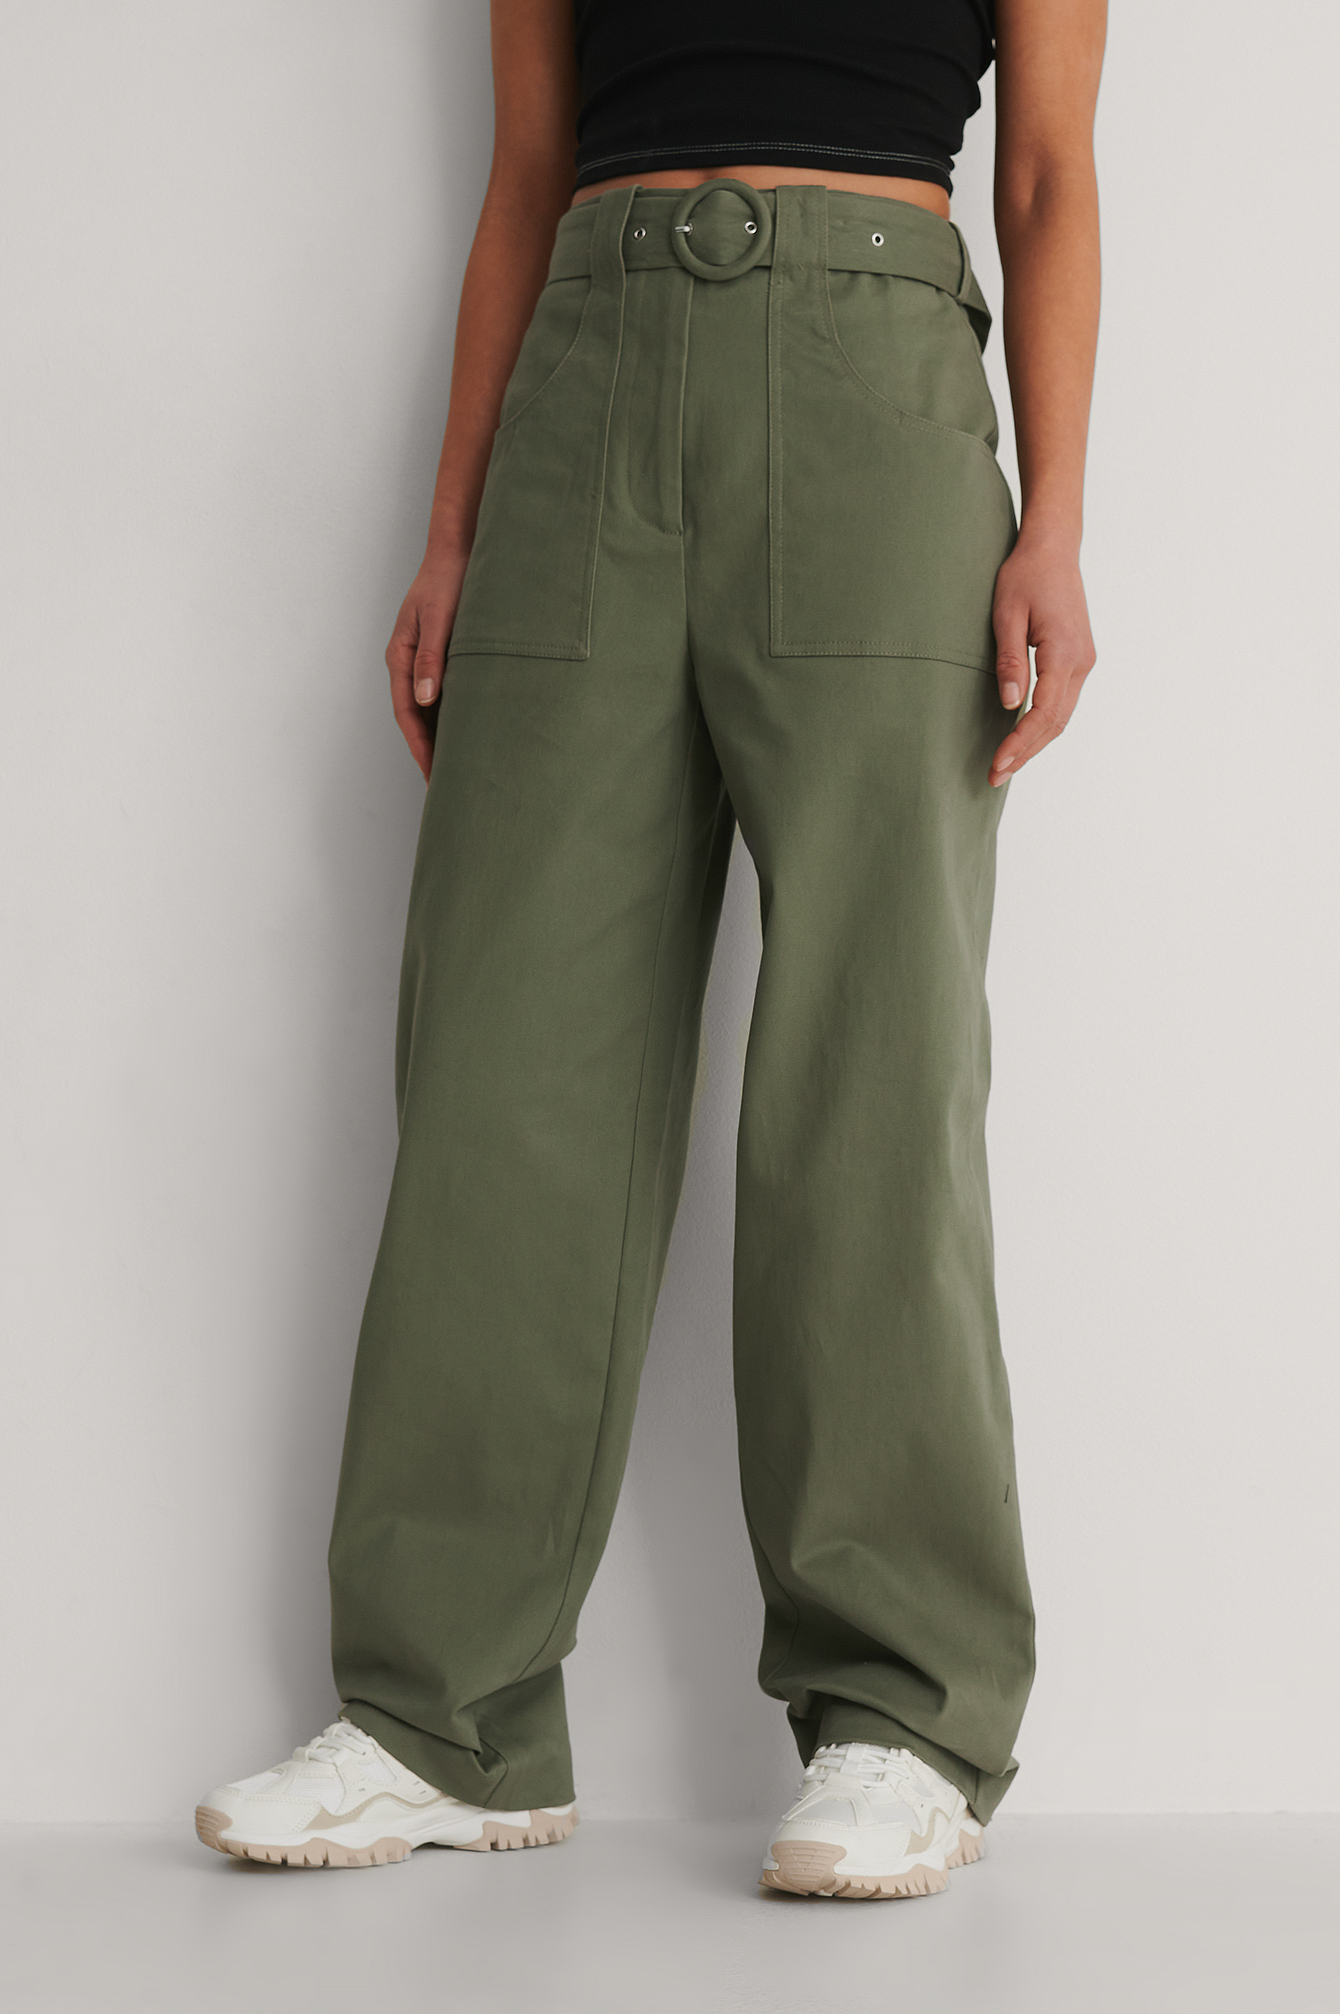 Khakhi Green Cotton Flax Cargo Pant, High-rise Cargo Pant, Solid Pant,  Customizable Pant With Pockets, Plus Size, Petite, Tall Etsw -  Canada